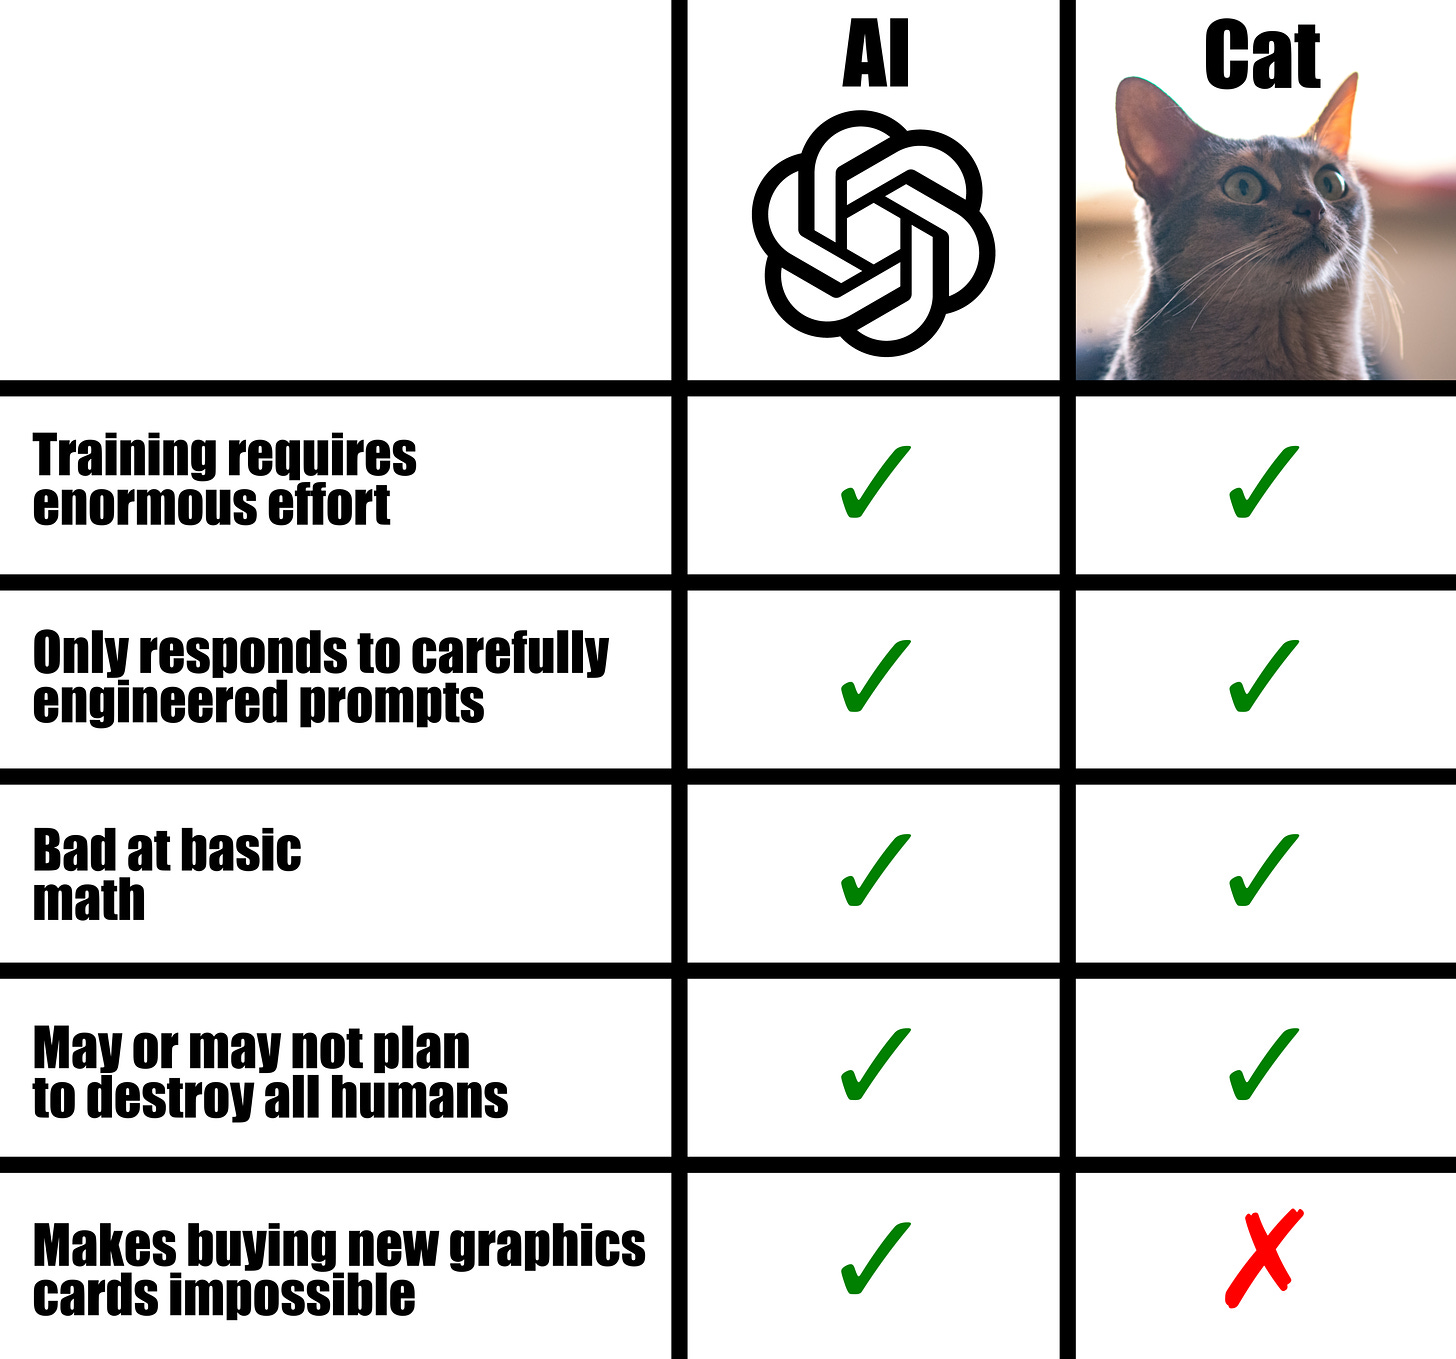 Comparison of AI and cats. Both require enormous effort to train, both only respond to carefully engineered prompts, both are bad at basic math, both may or may not plan to destroy all humans, but only AI makes buying new graphics cards impossible.